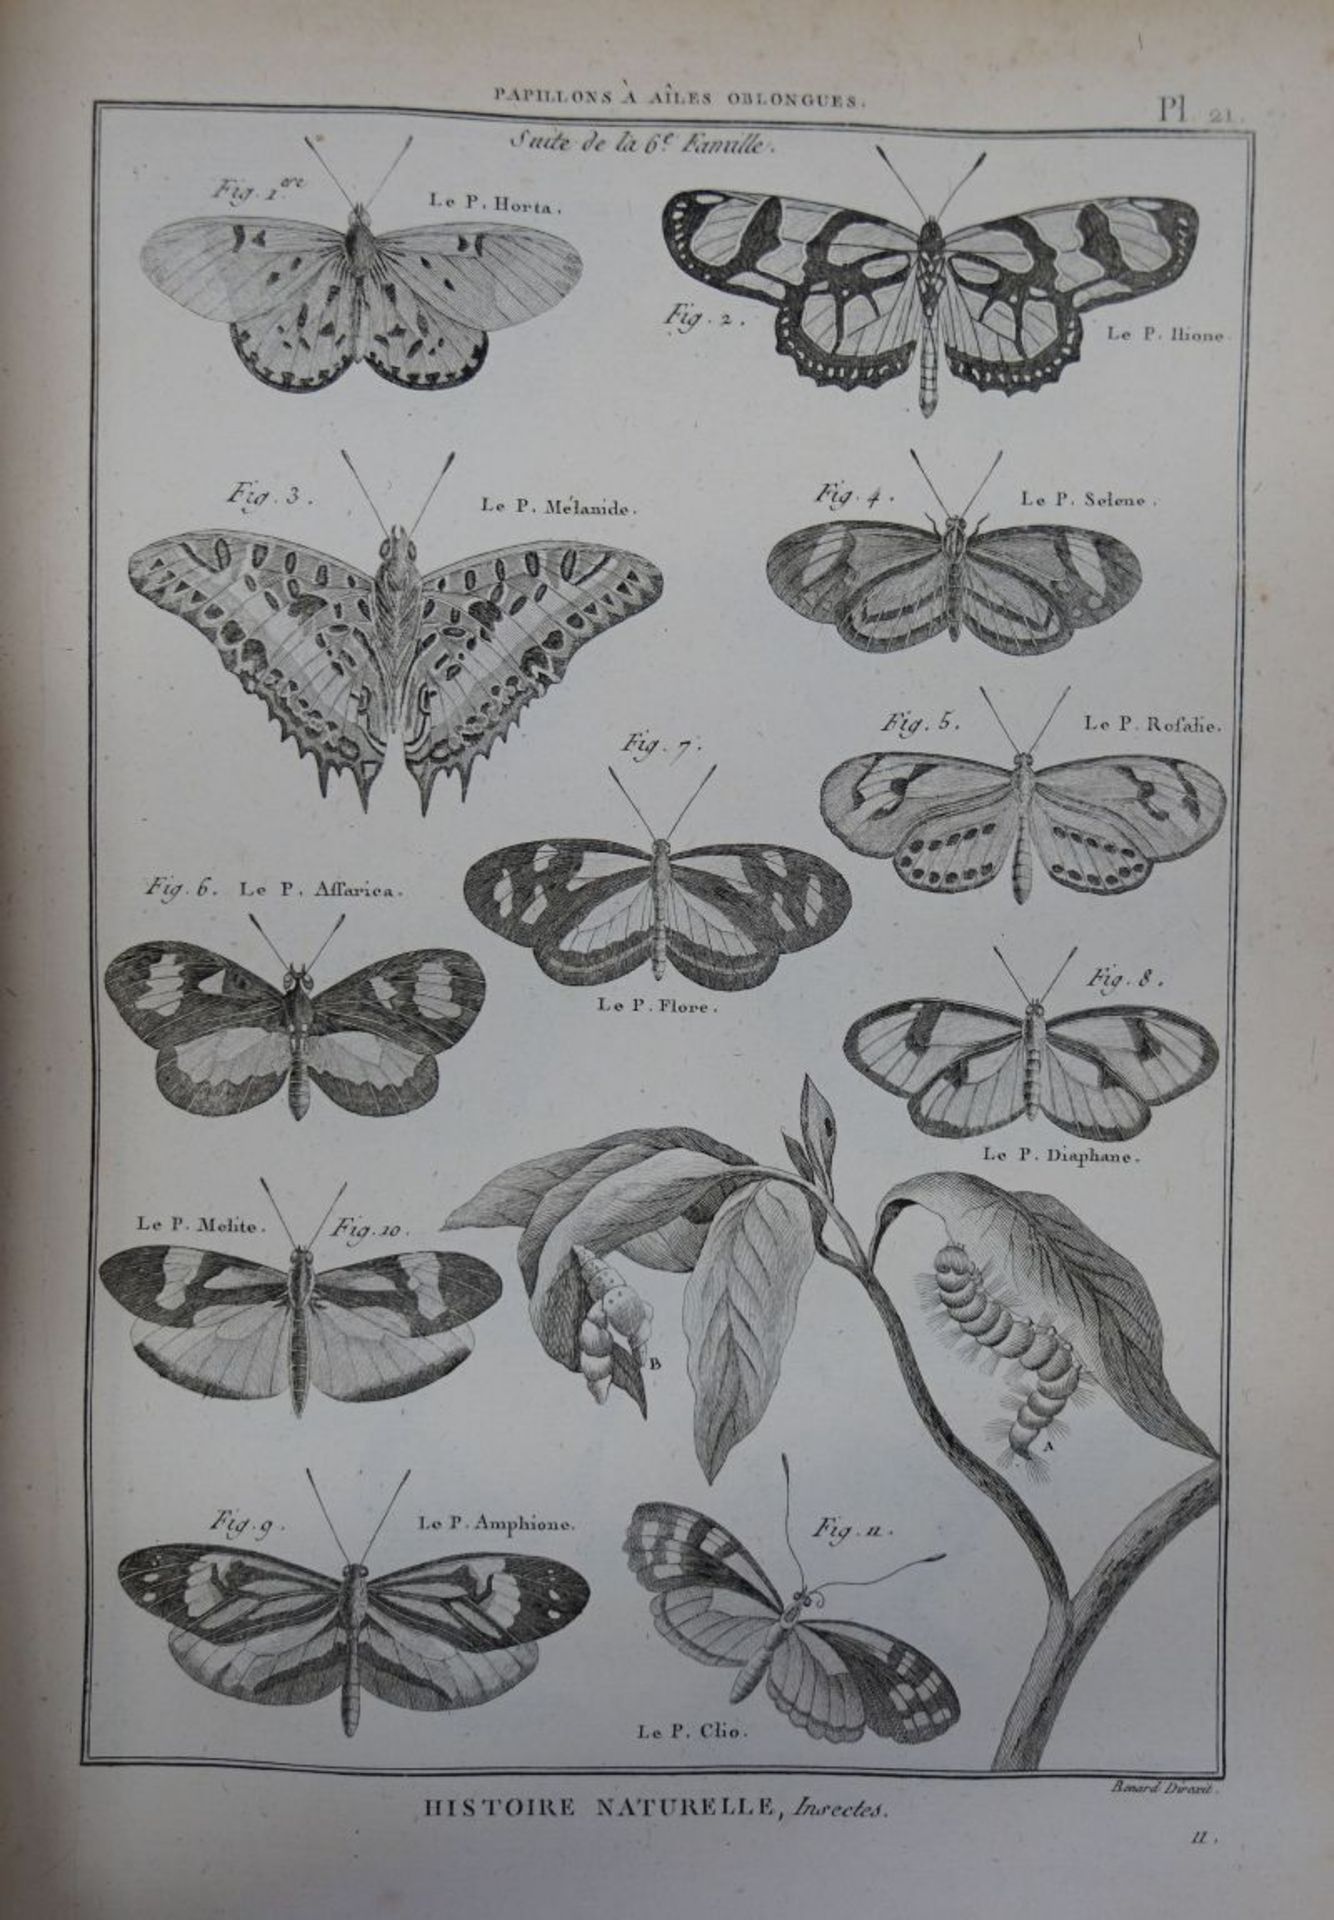 Diderot, Denis: Histoire naturelle, Insects.